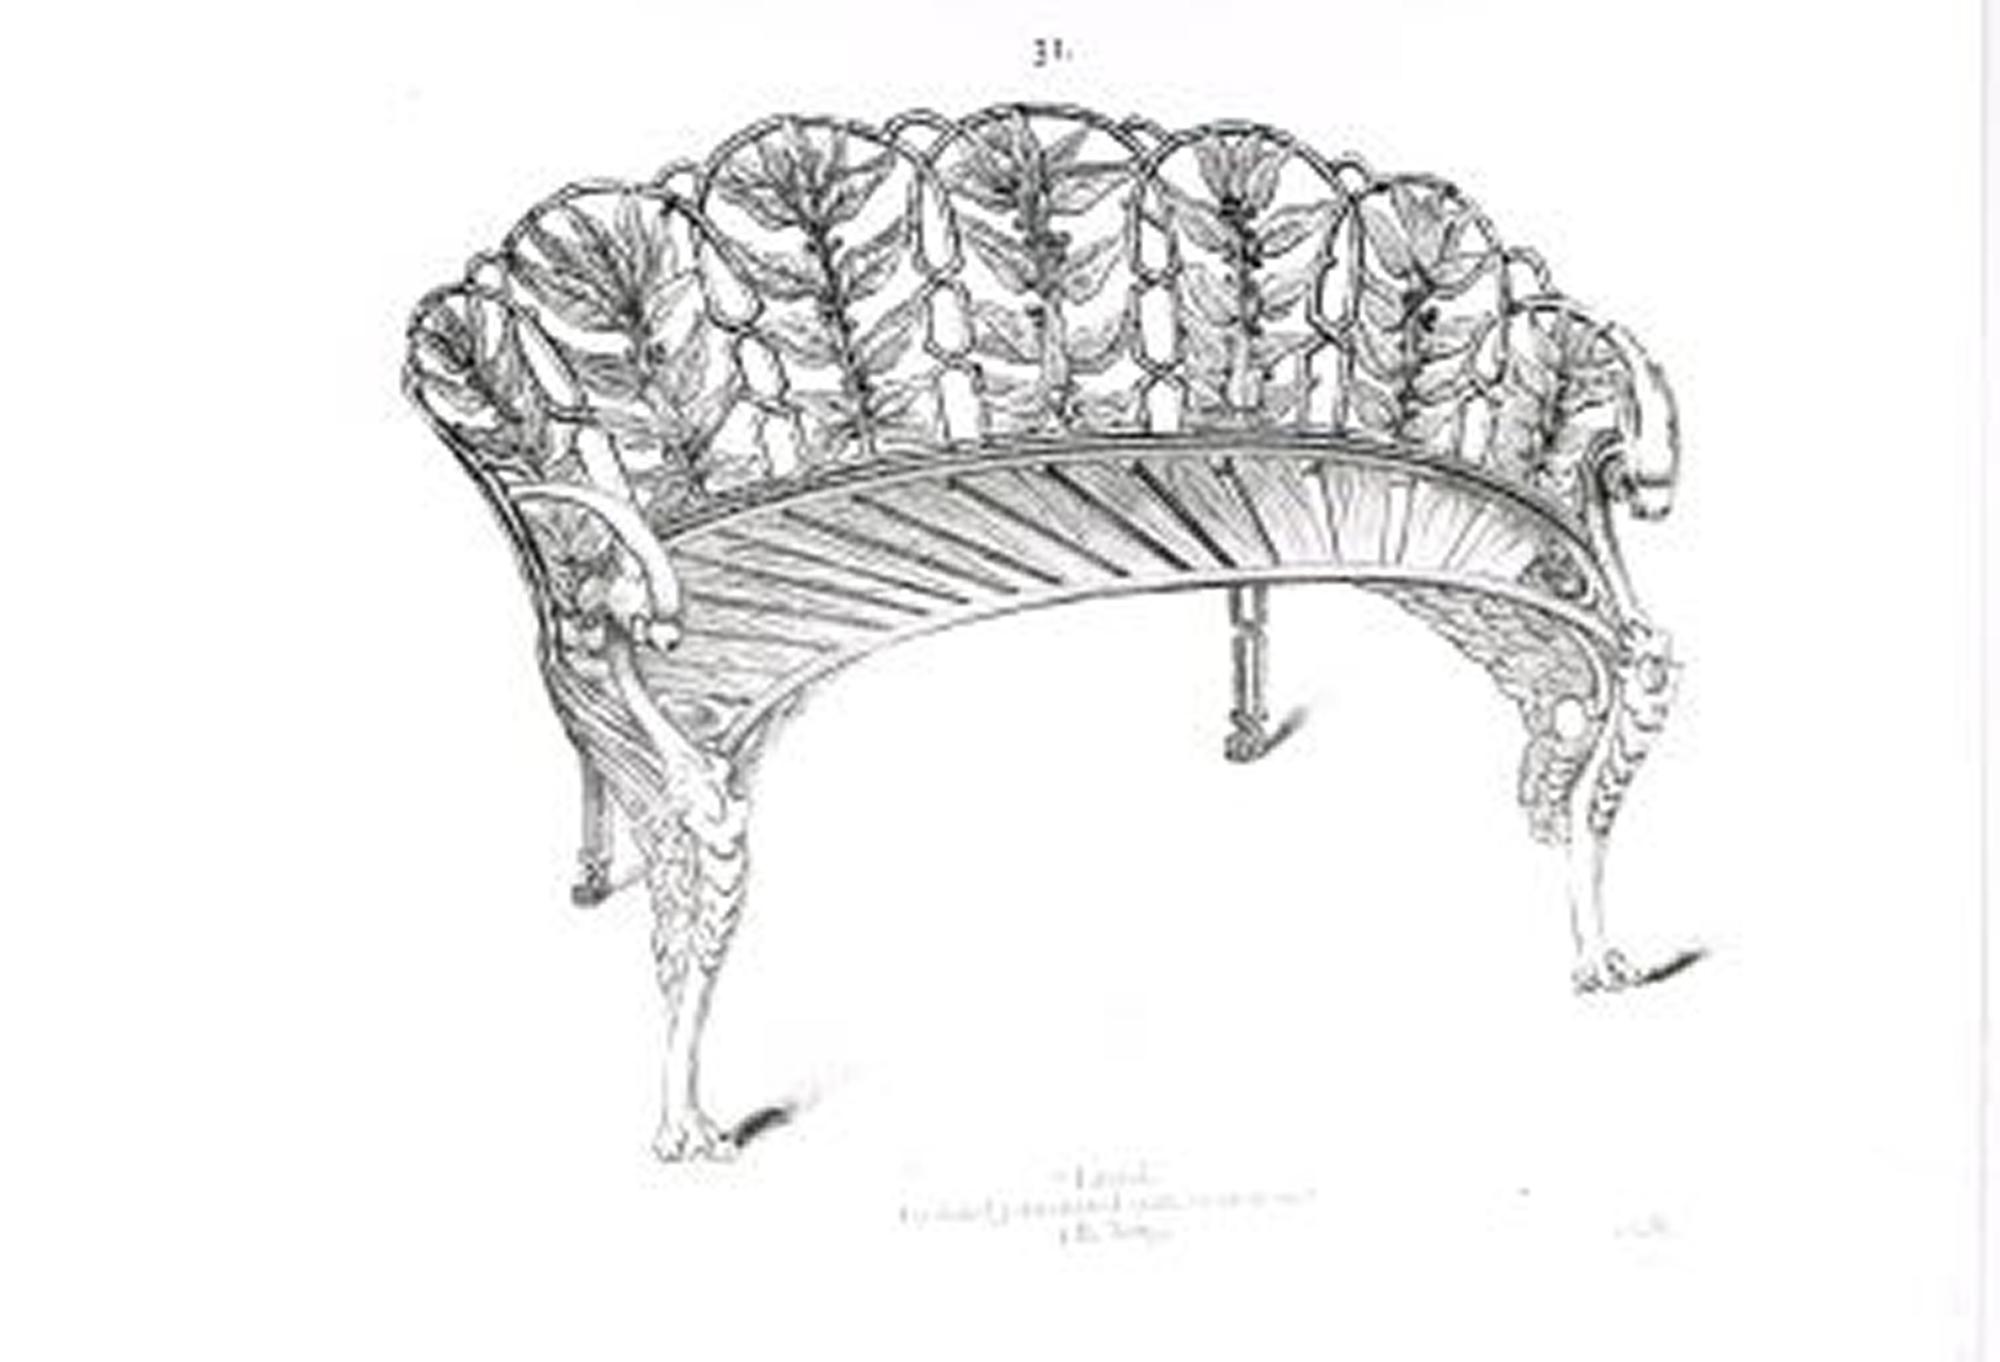 Garden seats: A Coalbrookdale Laurel pattern cast iron seat, circa 1870, foundry marks possibly - Image 2 of 2